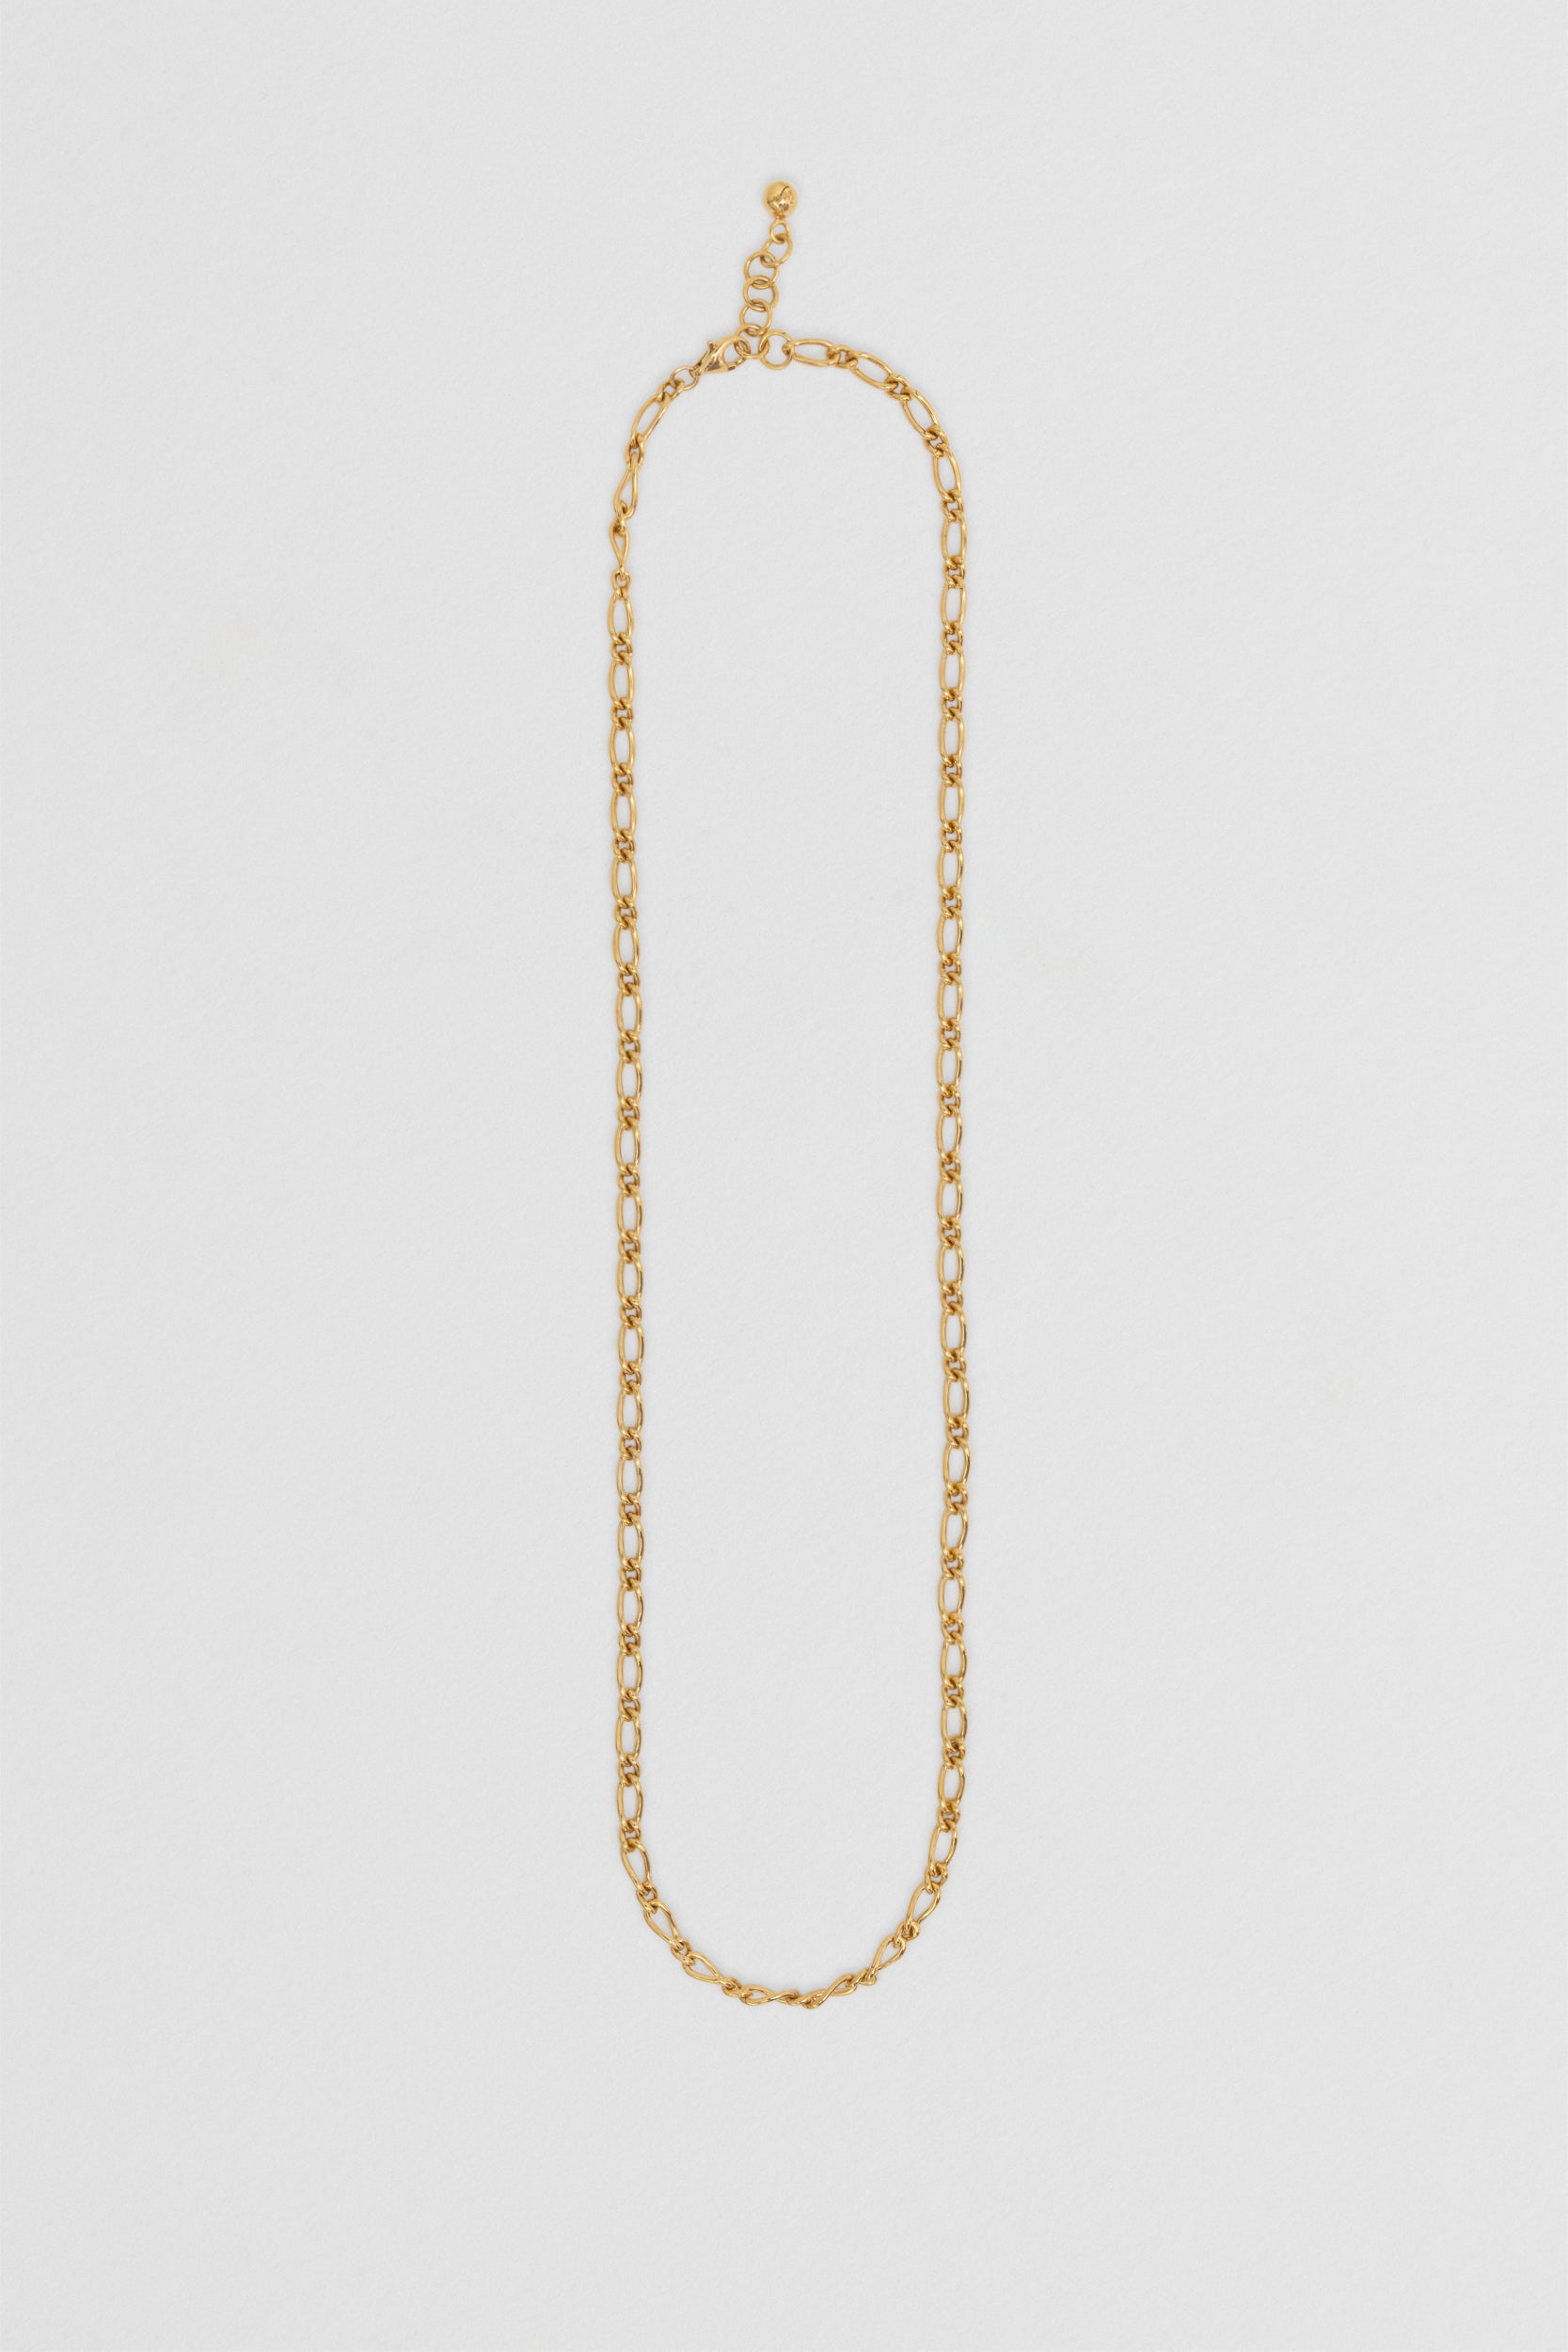 Lynkage Chain Necklace - Gold